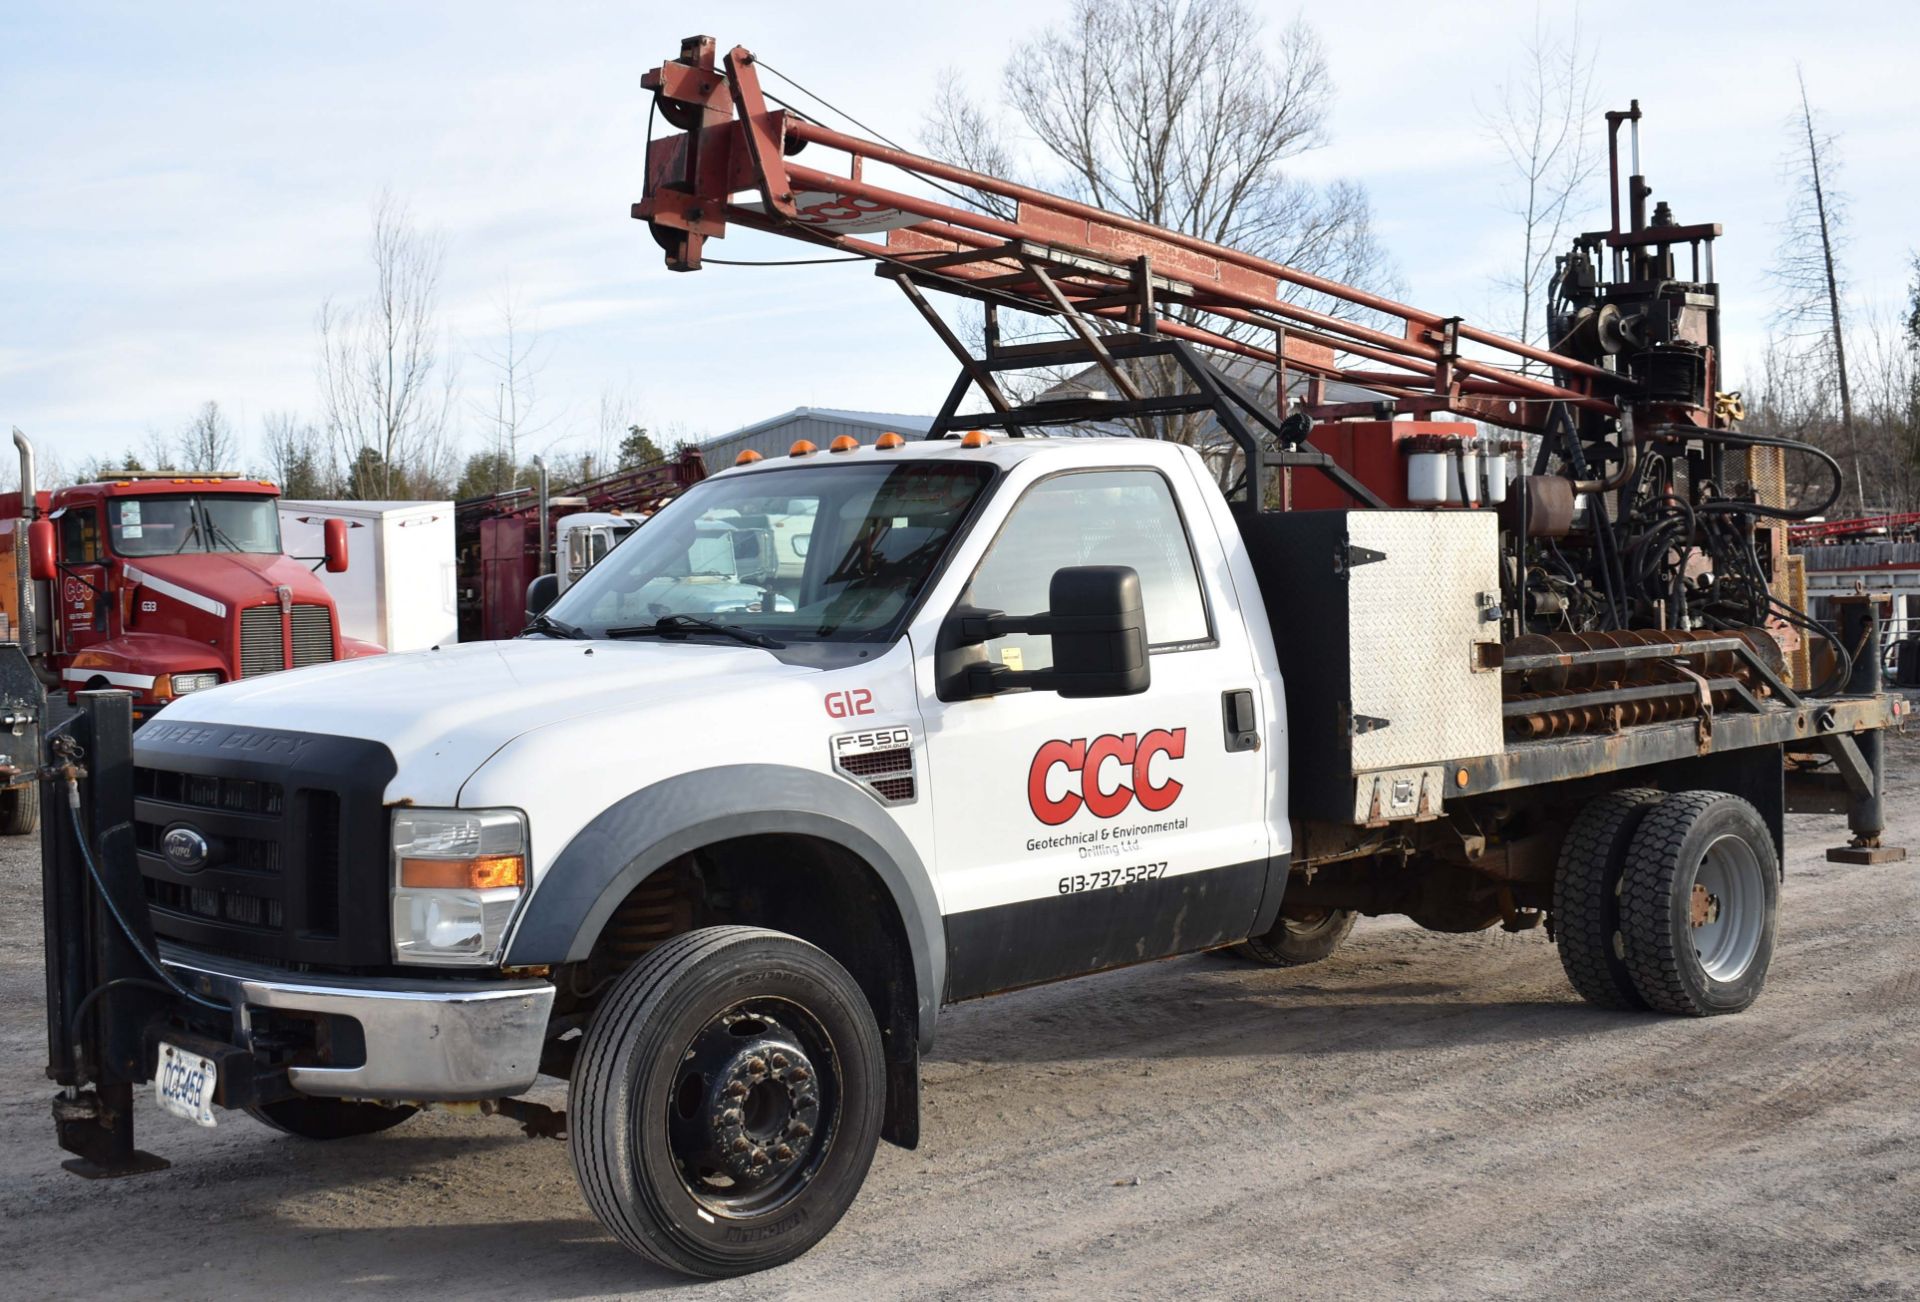 FORD (2007) F-550 SUPER DUTY MOBILE DRILL RIG WITH V8 POWER STROKE ENGINE, 258,966 KM (RECORDED ON